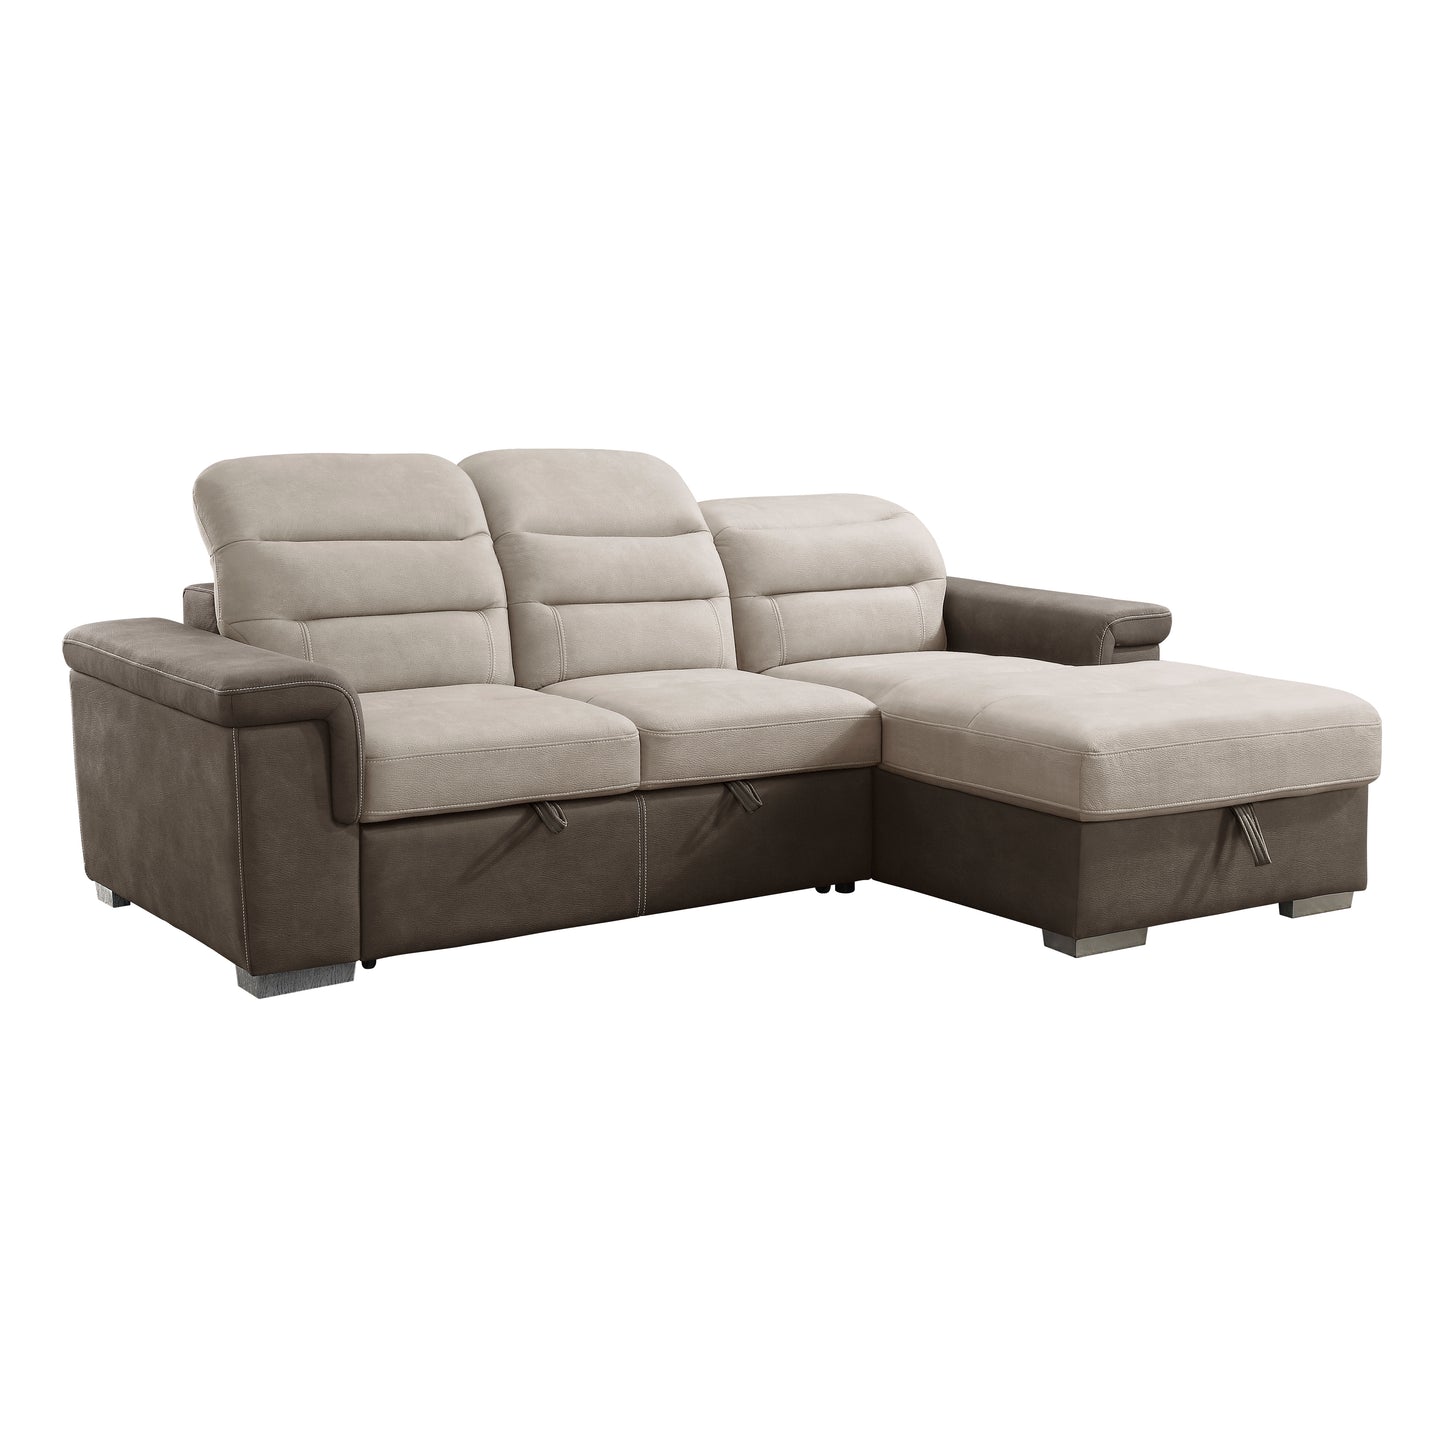 Alfio 2-Pcs Sectional w/ Adj. Headrests, Pull-out Bed & Right Chaise w/ Hidden Storage 2 TONE